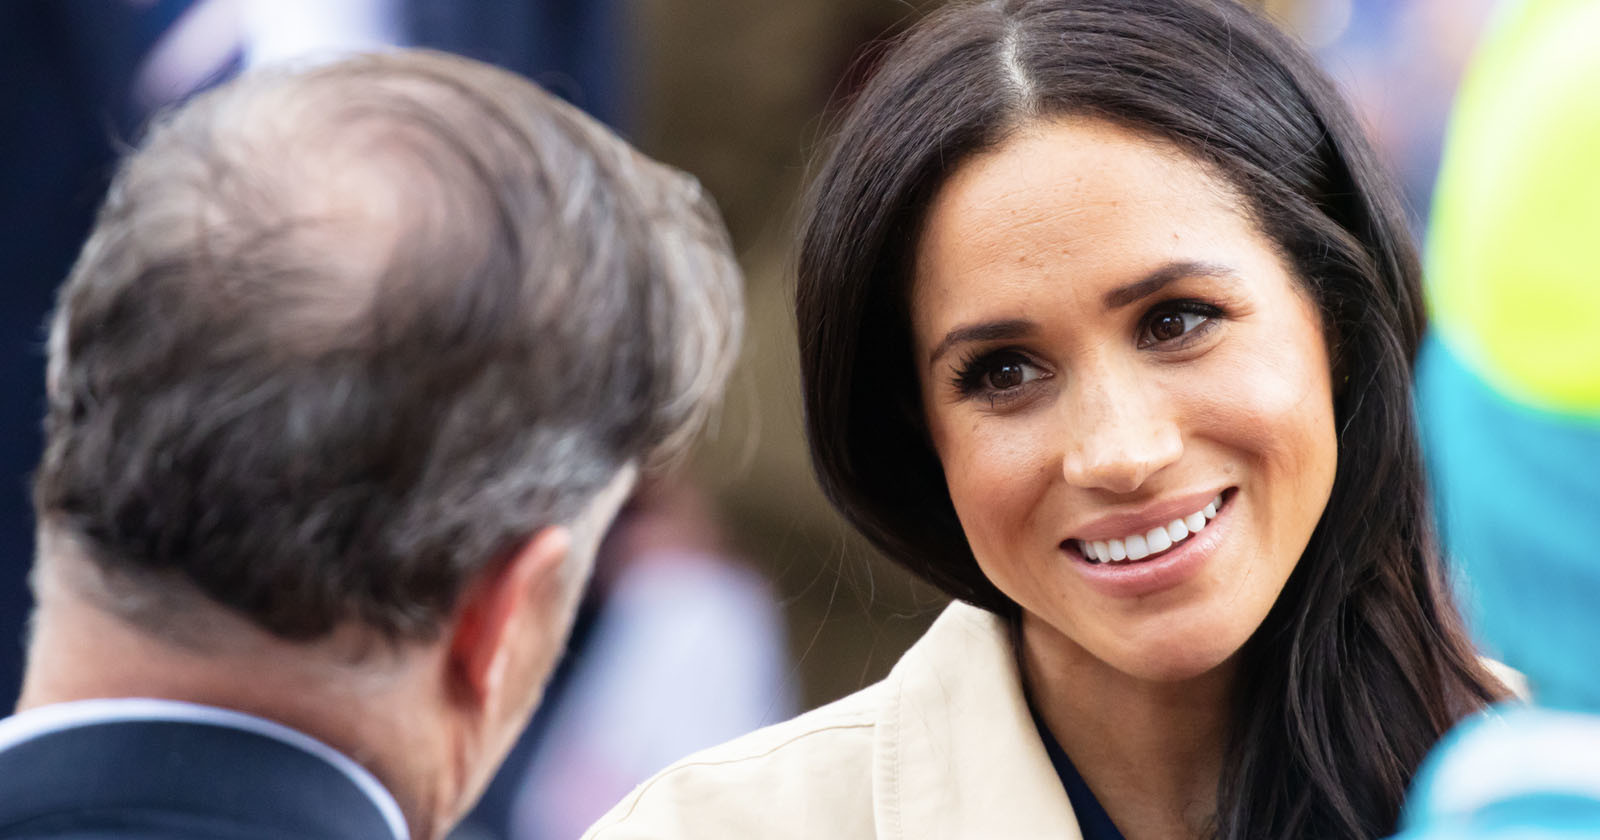  photographer sues channel over interview meghan markle 